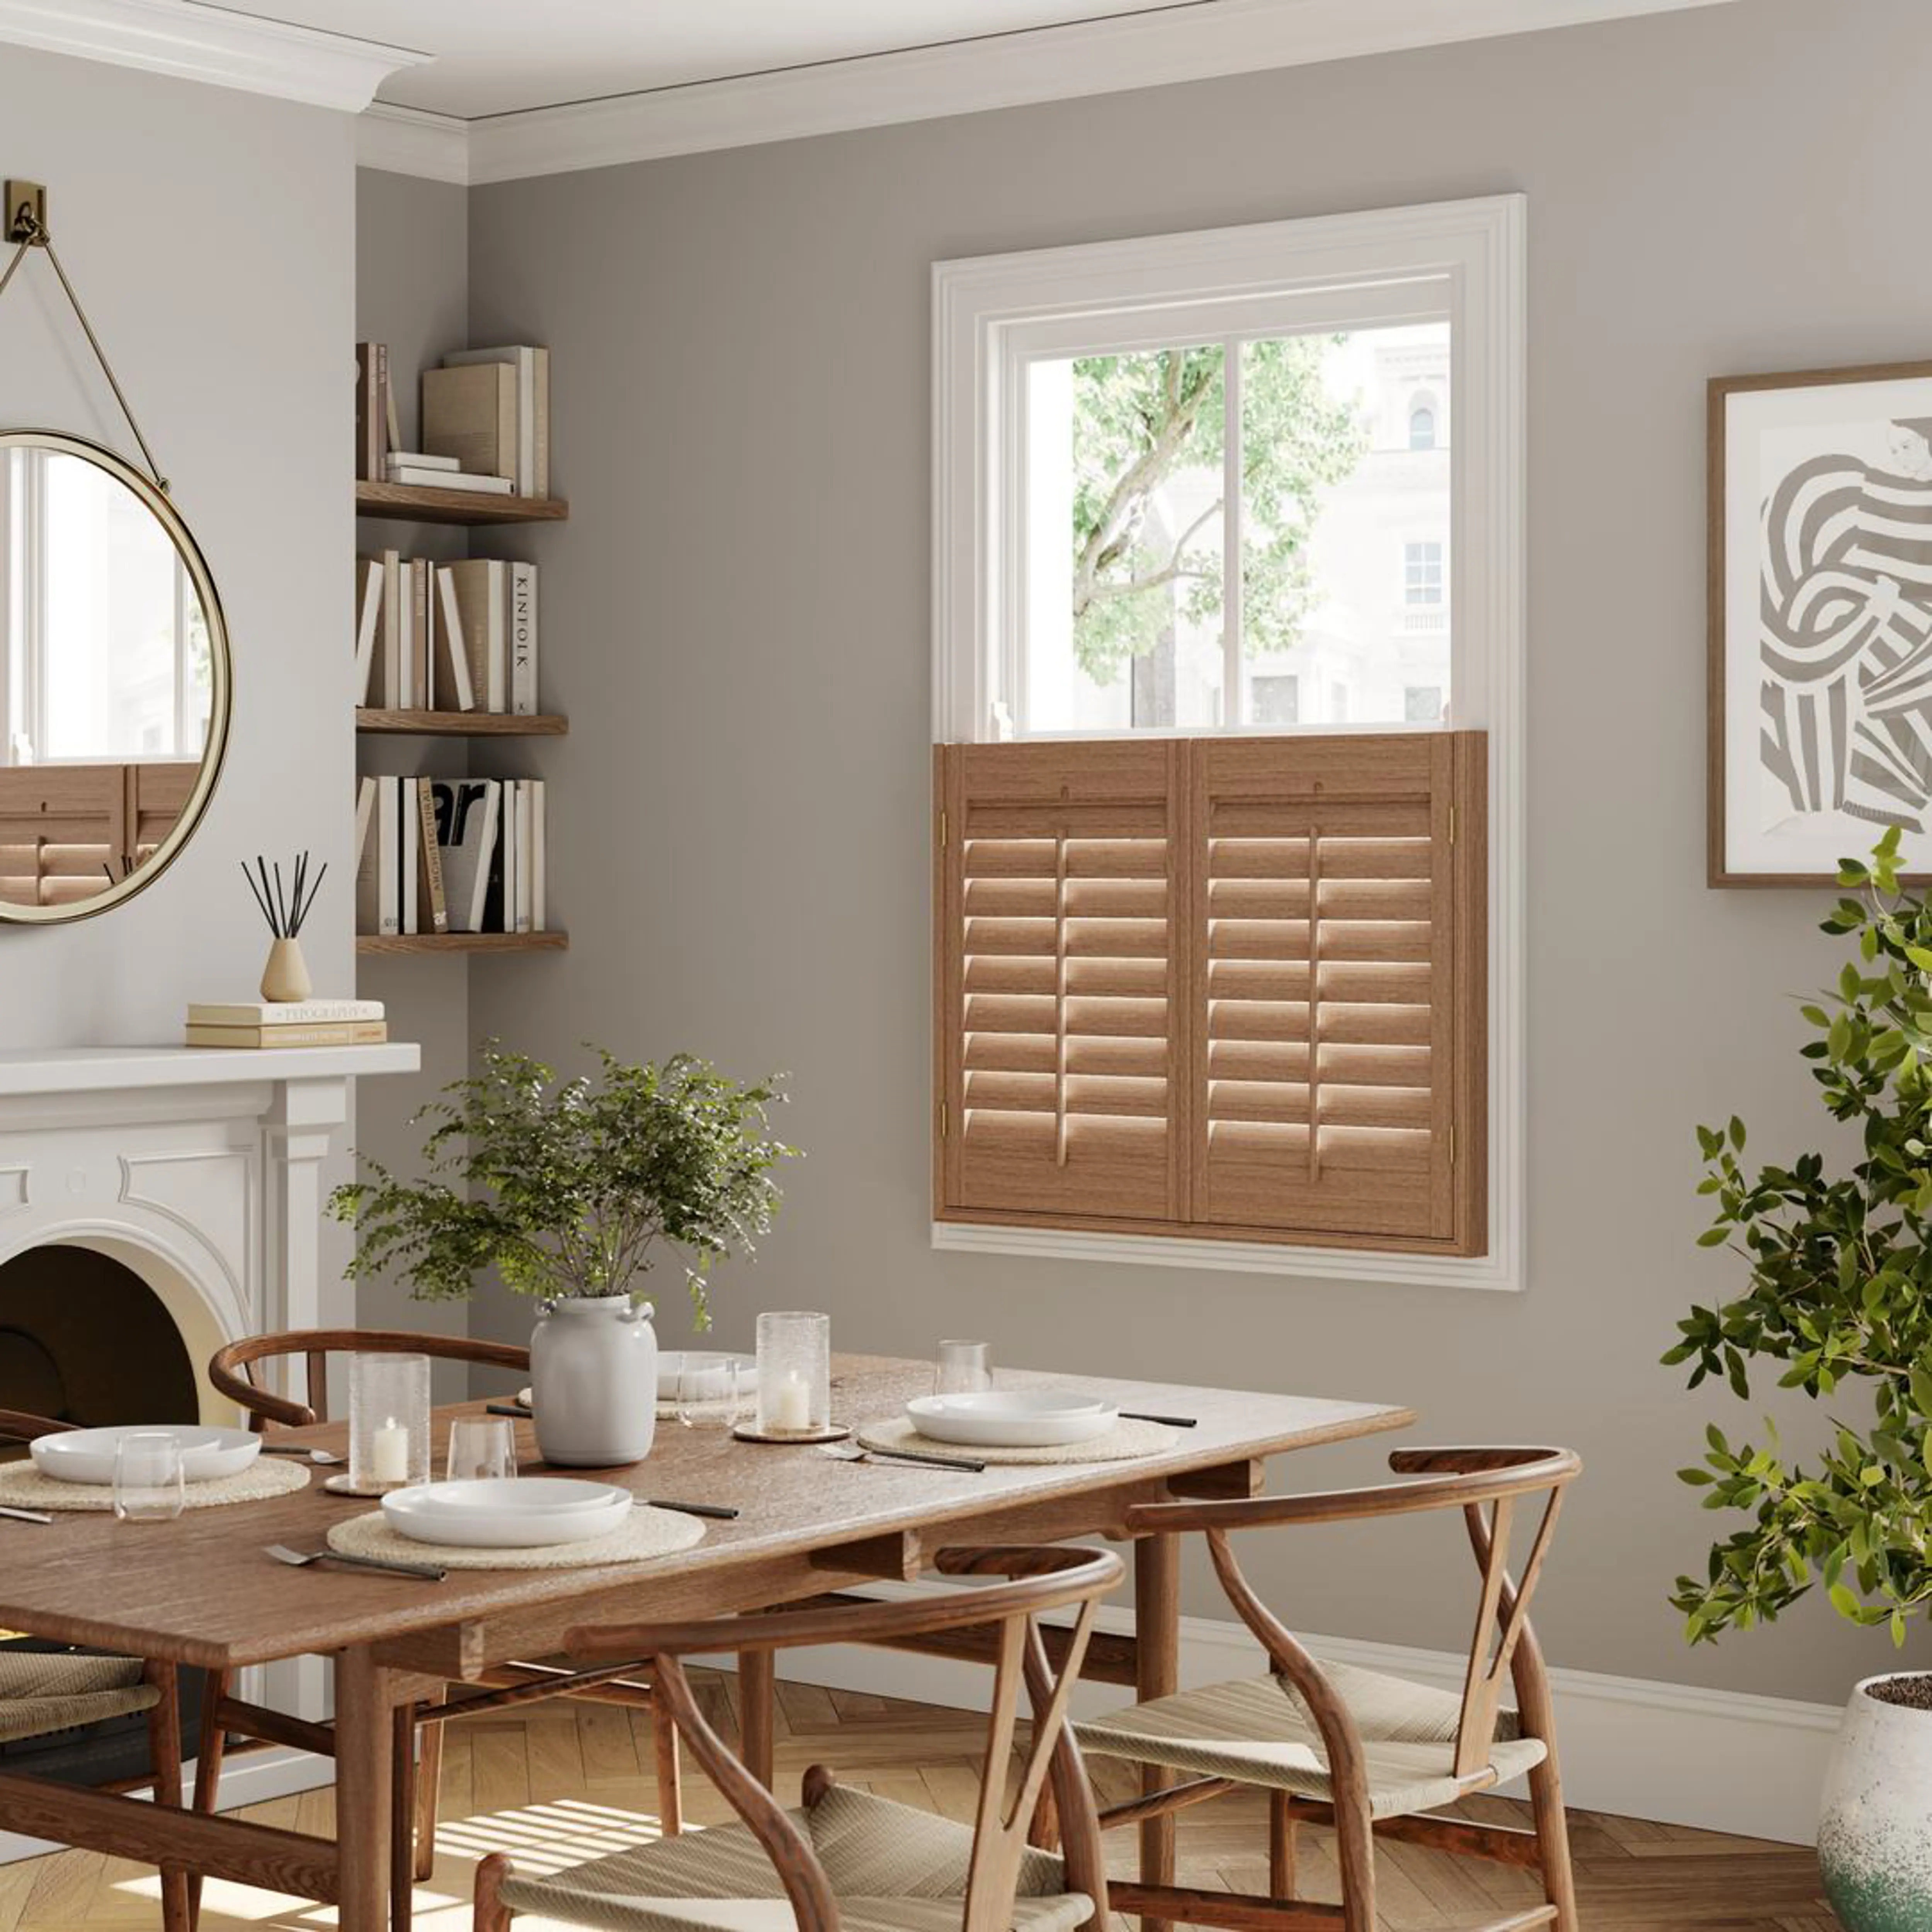 Honey stained wooden cafe style shutters in neutral dining room